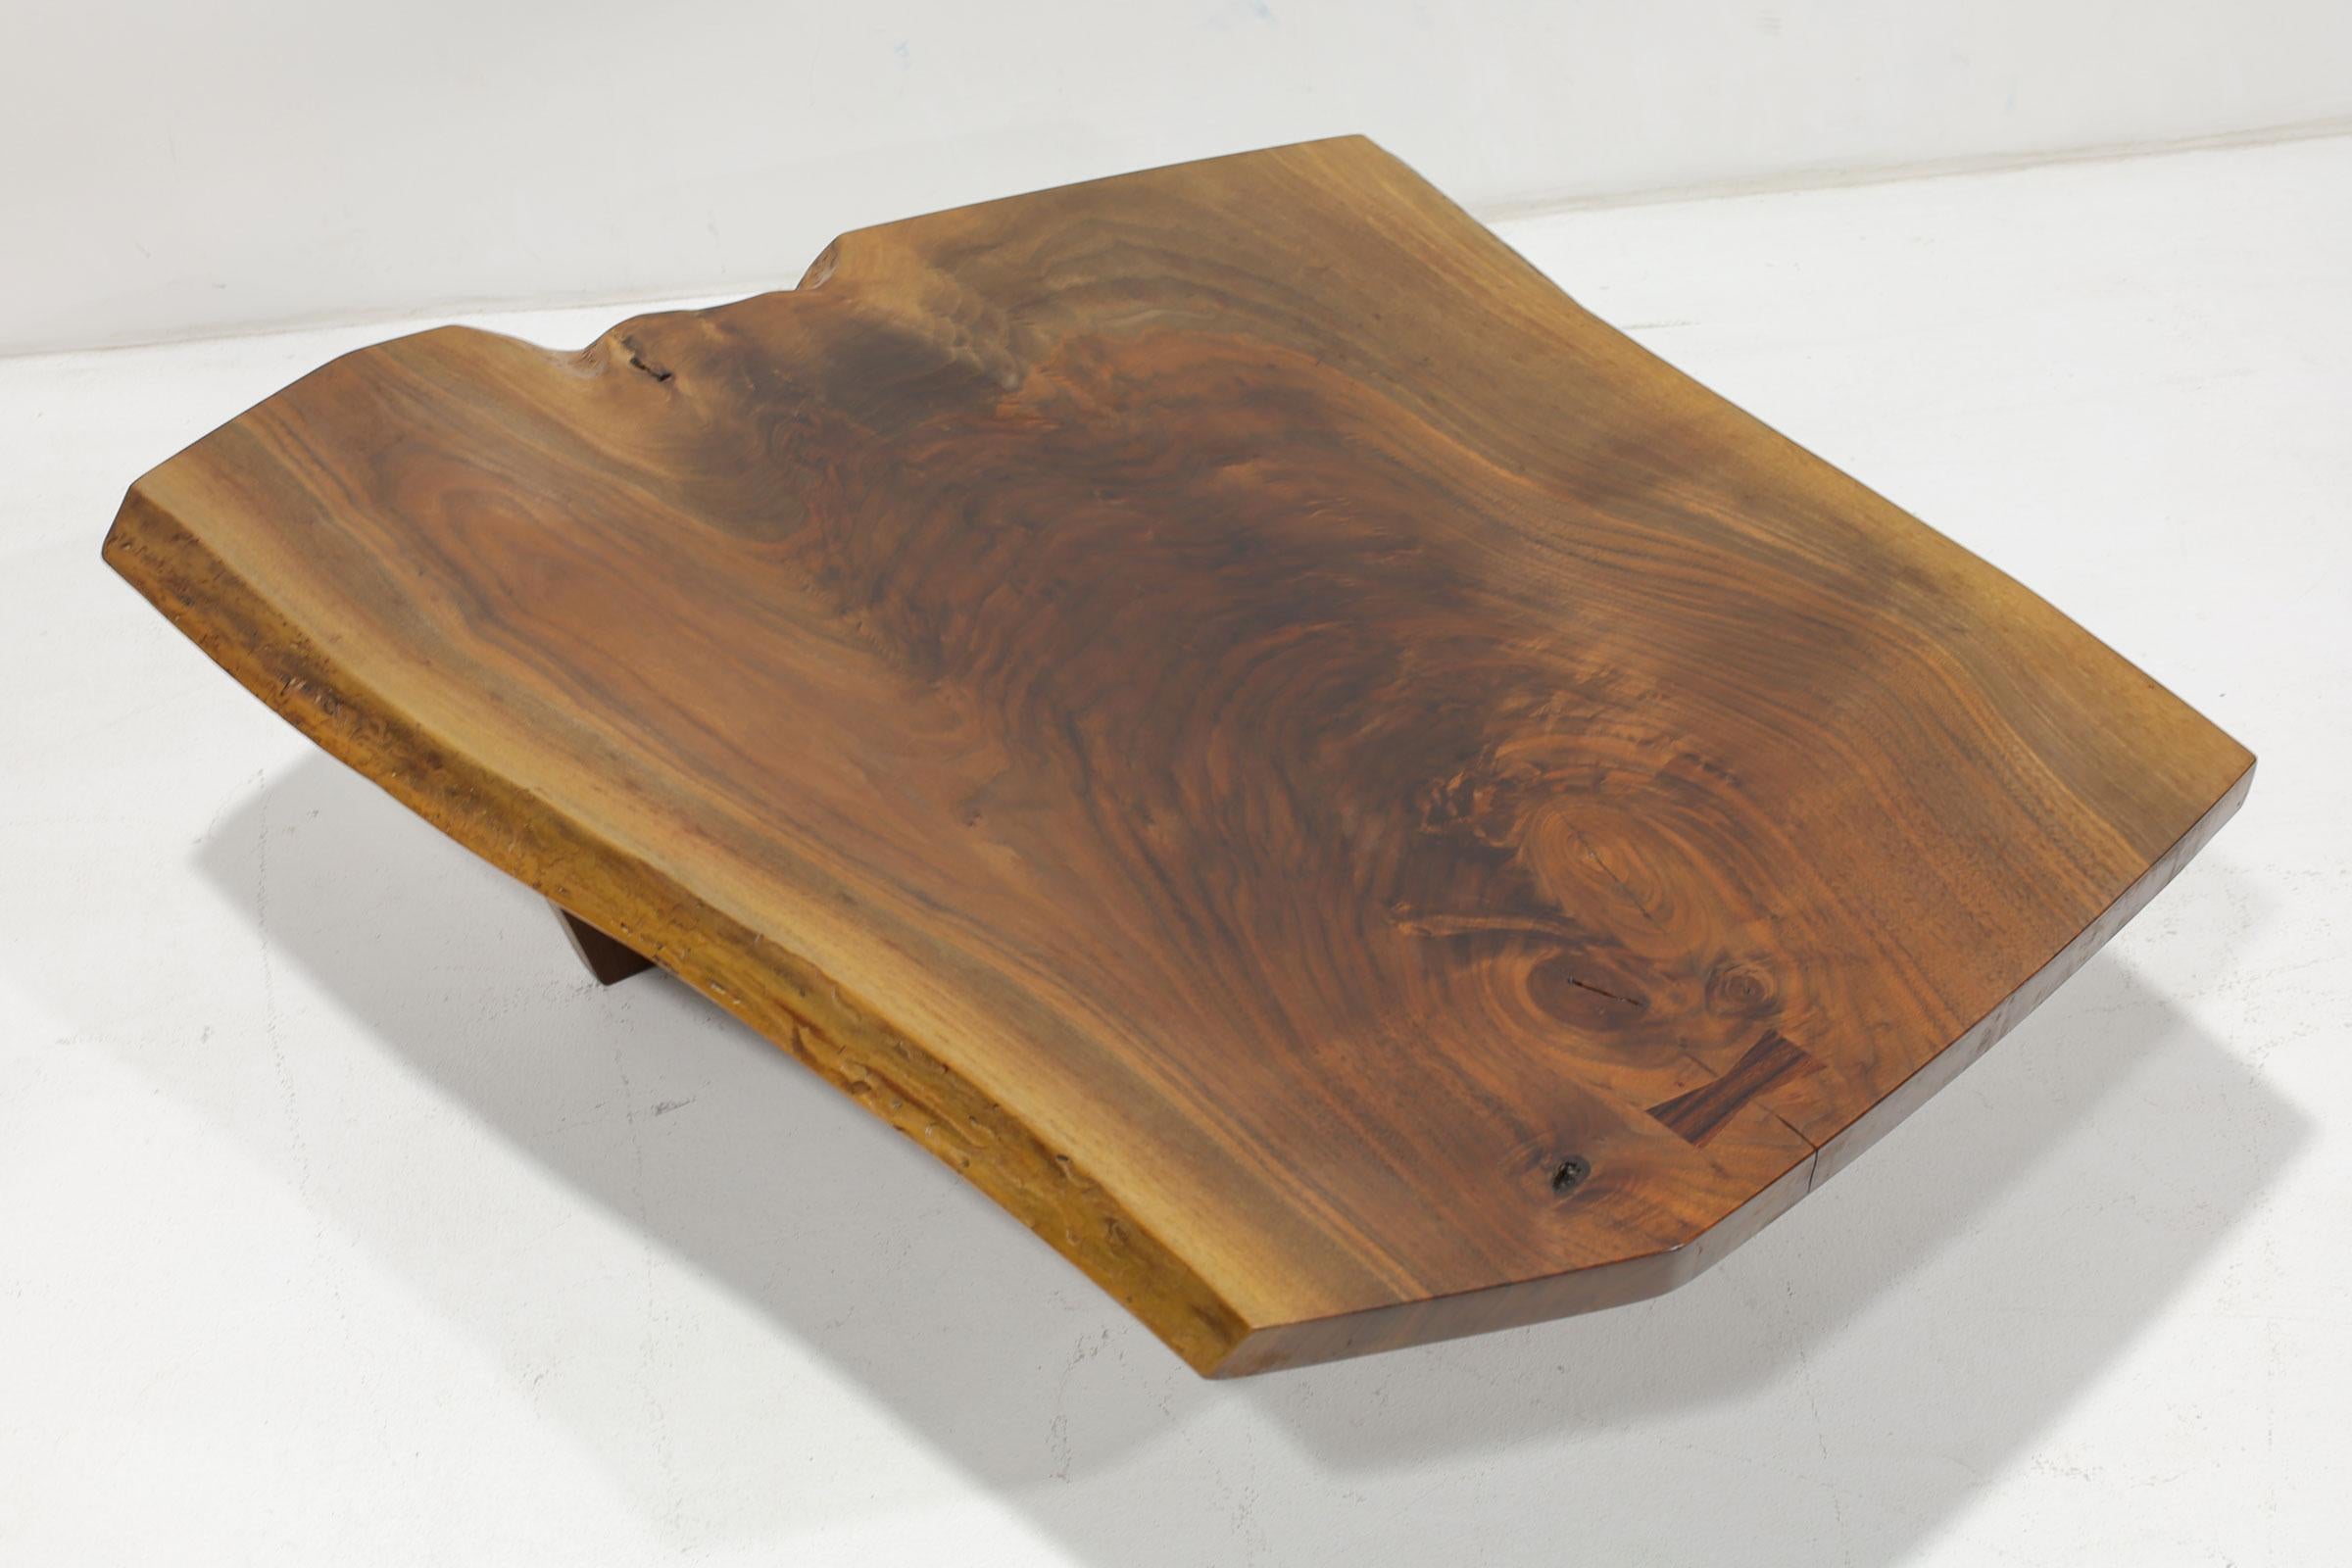 Mira Nakashima Conoid Slab Cocktail Table in Black Walnut and Rosewood, Signed For Sale 1